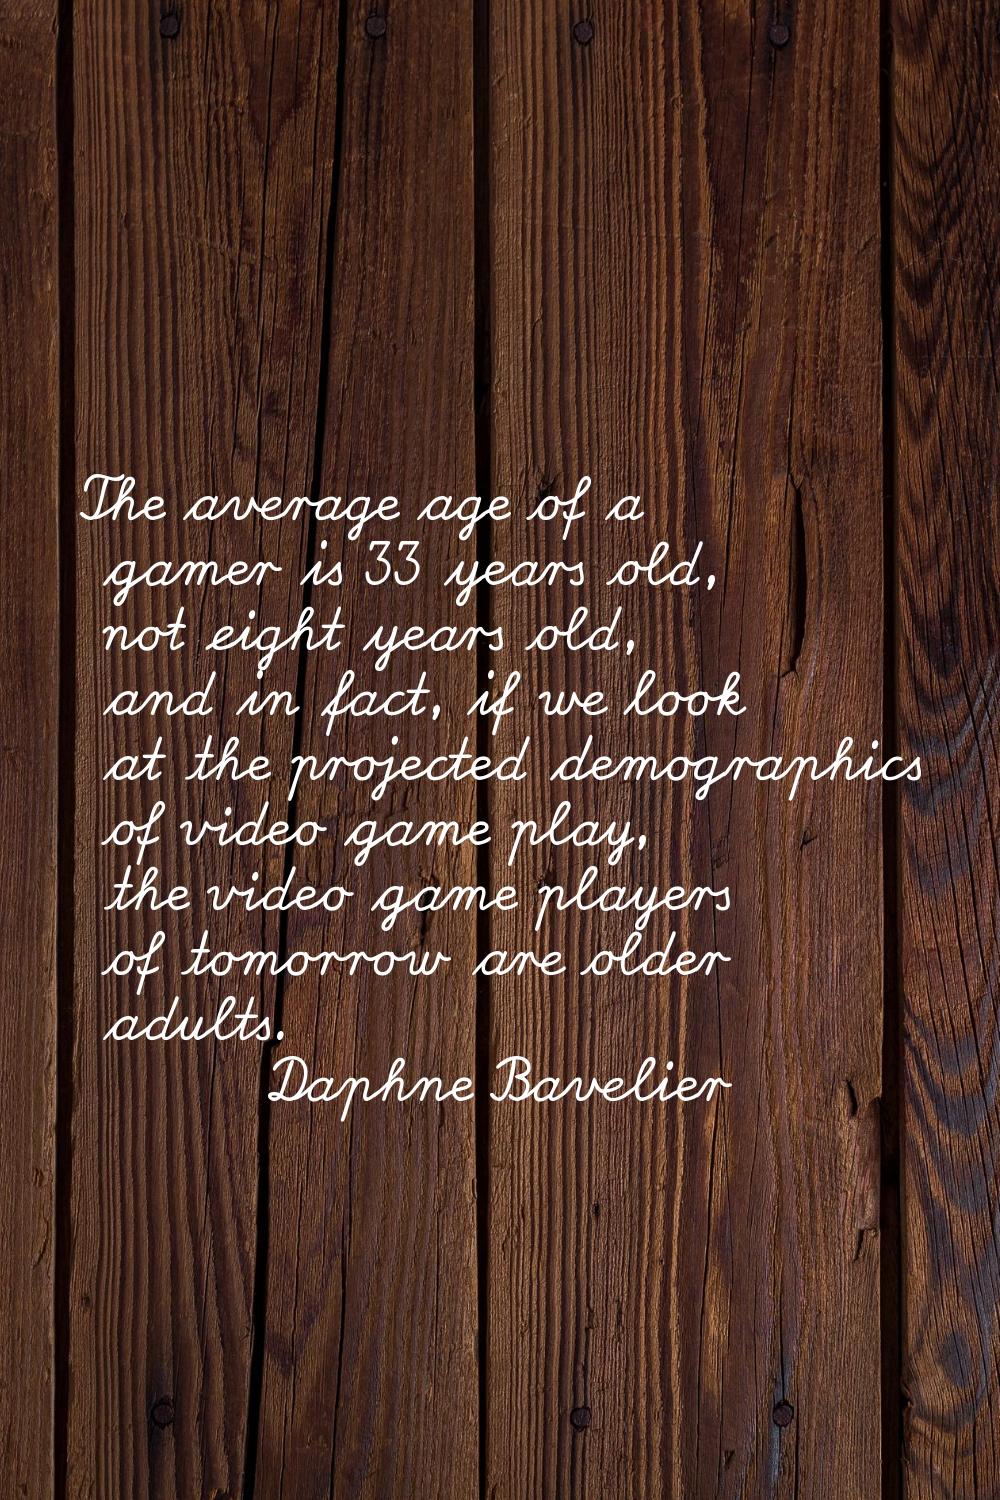 The average age of a gamer is 33 years old, not eight years old, and in fact, if we look at the pro